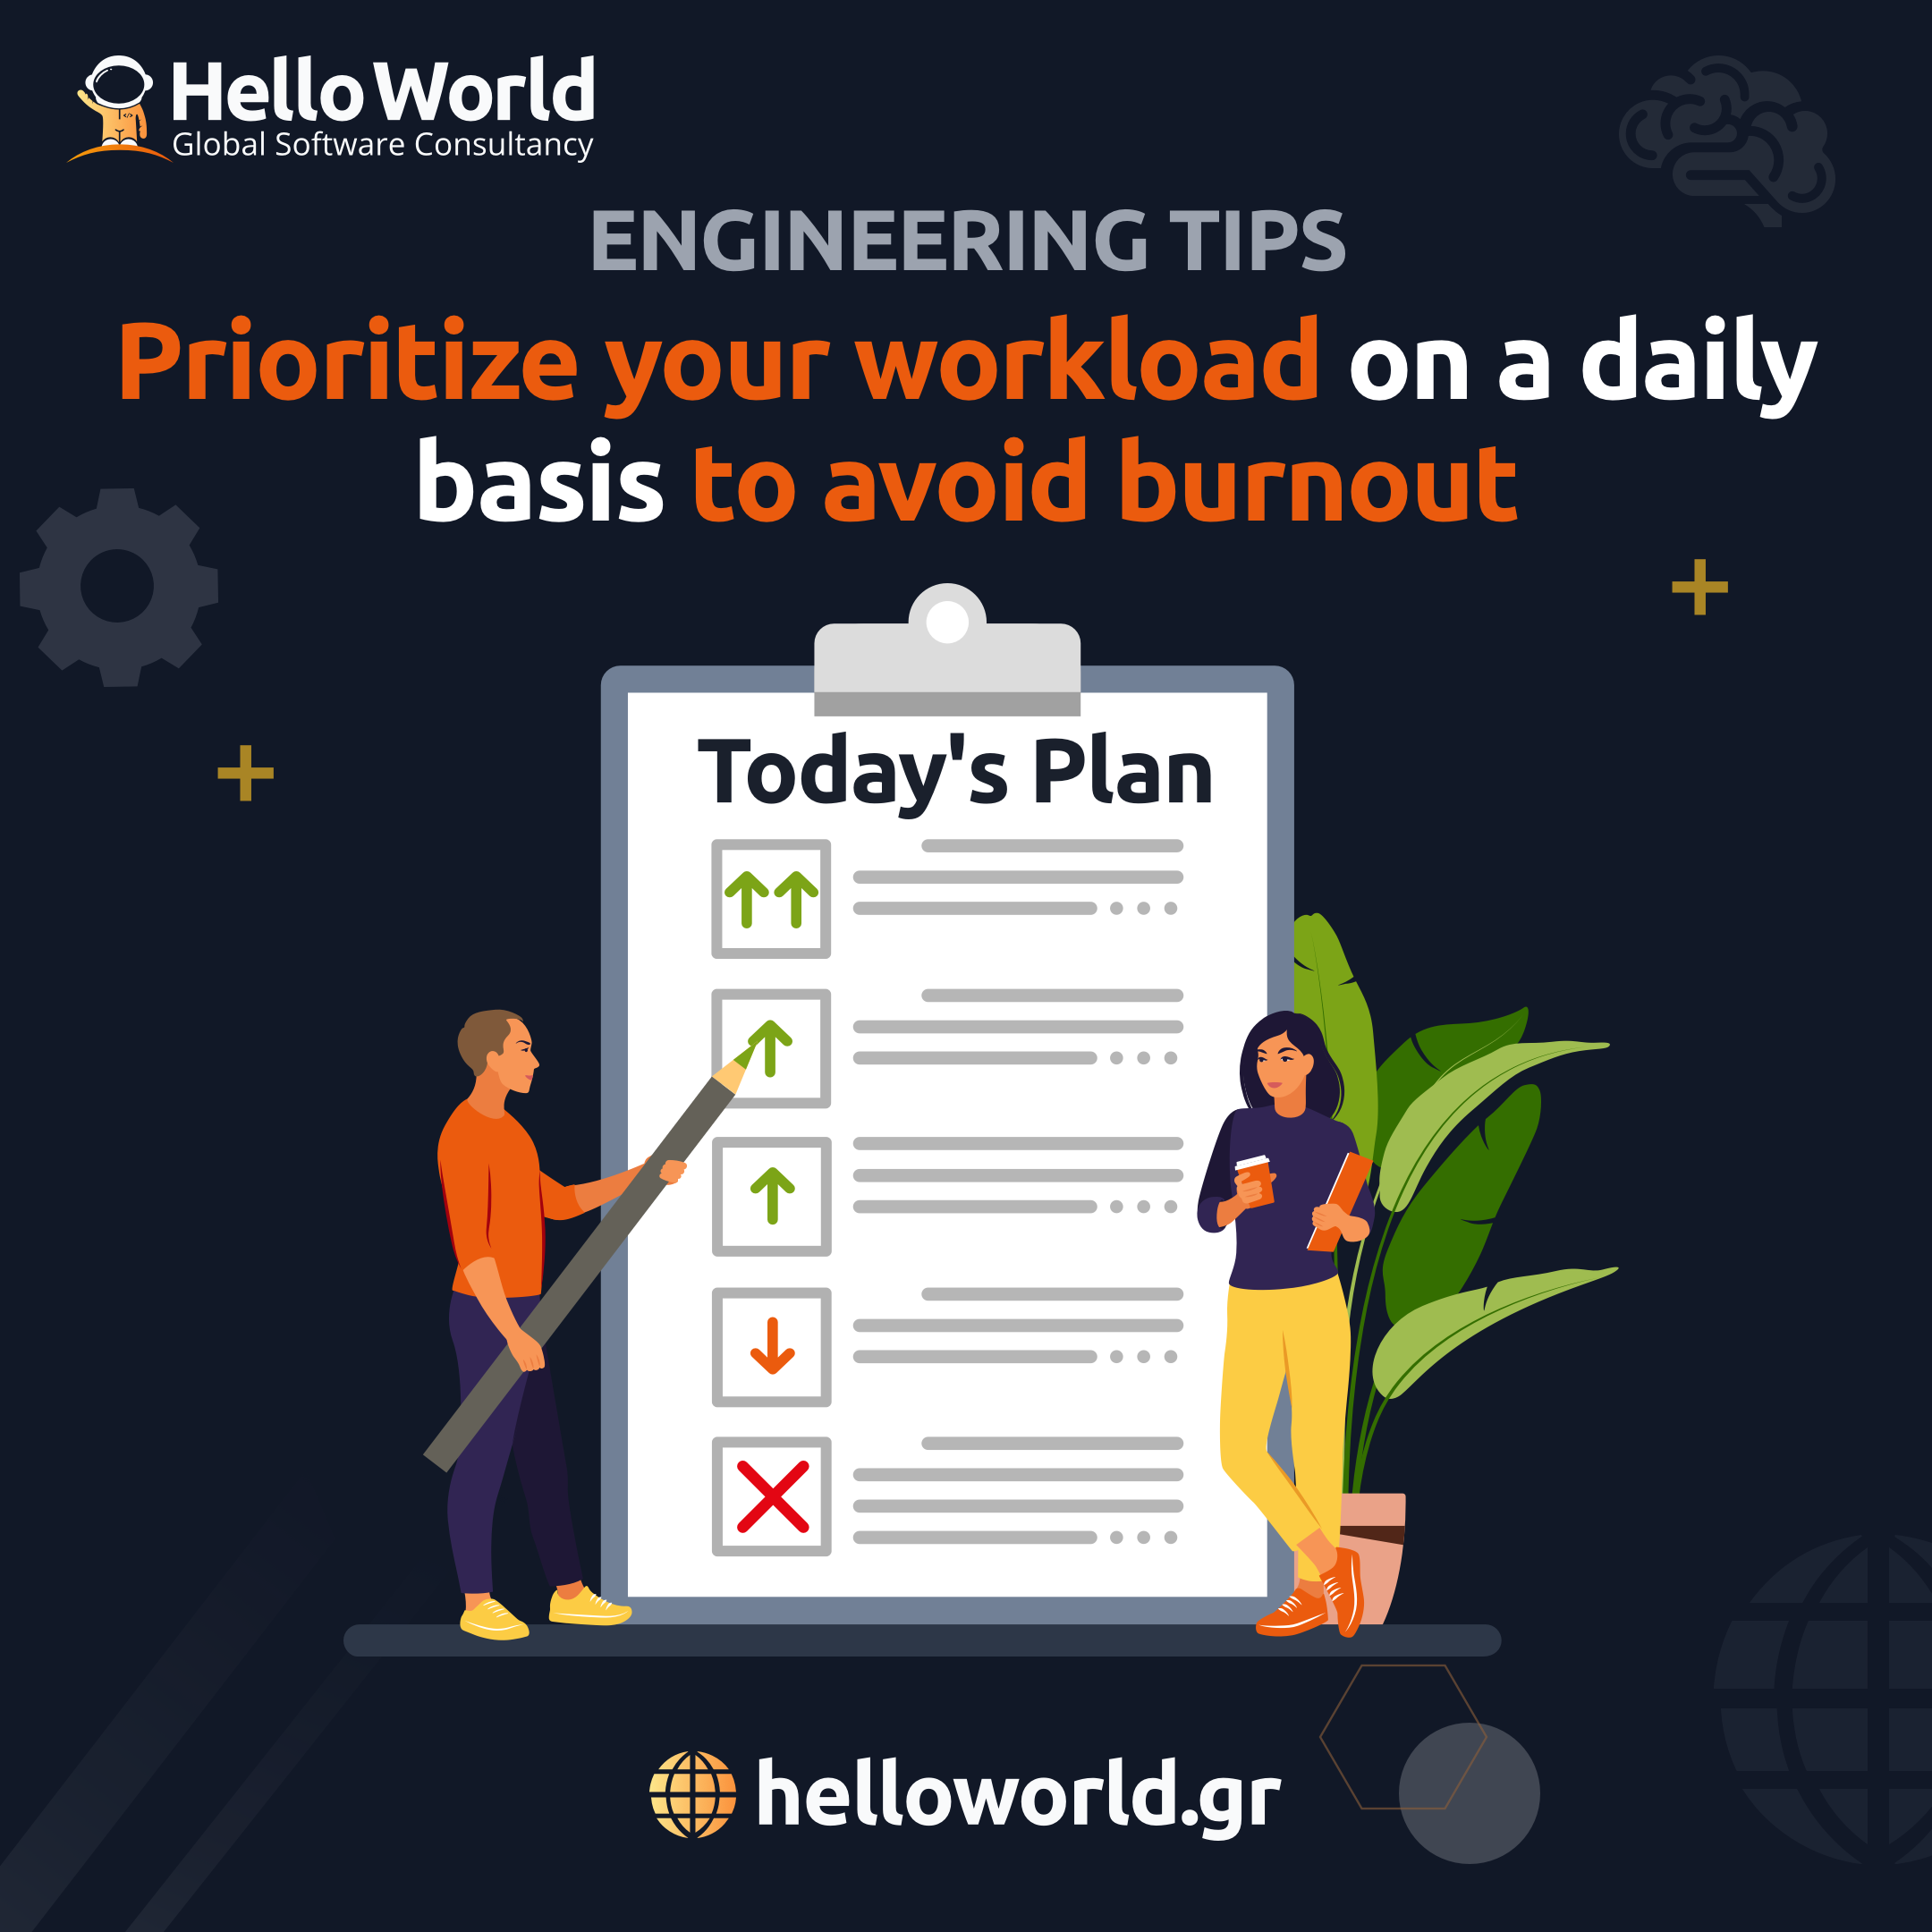 Prioritize your workload on a daily basis to avoid burnout